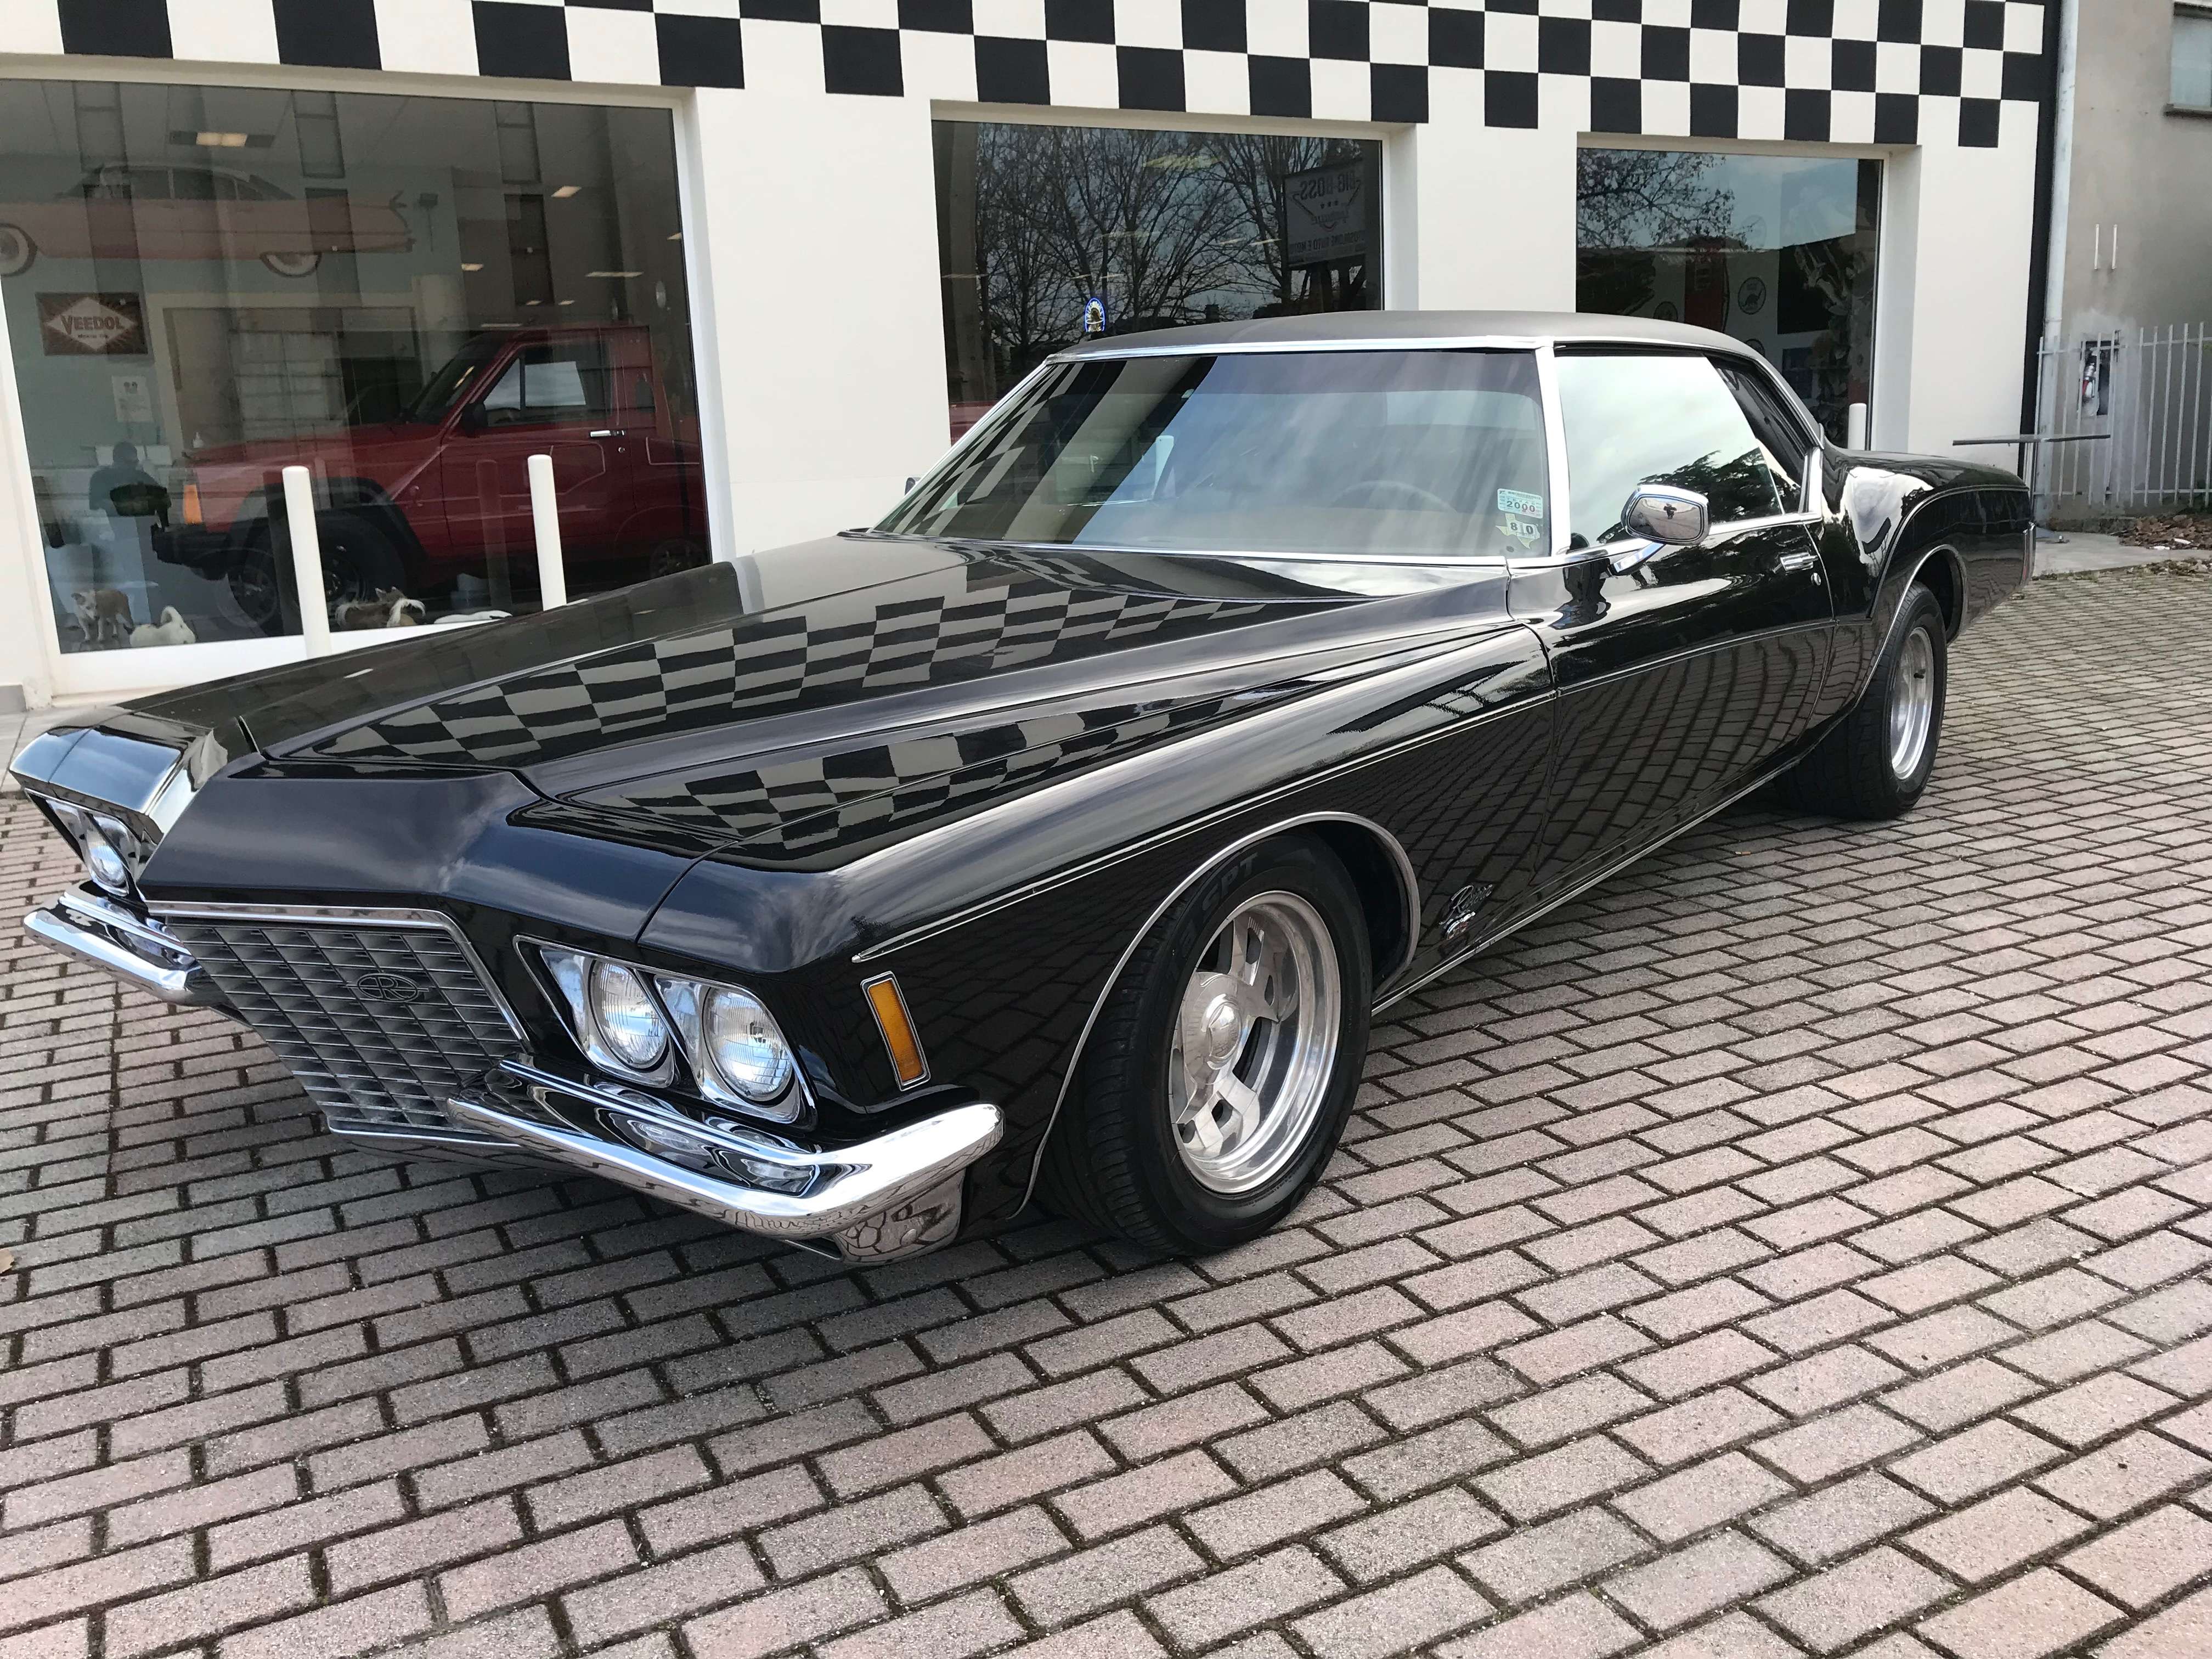 Buick Riviera Coupe in Black antique / classic in Forlì - Forlì Cesena for € 36,500.-